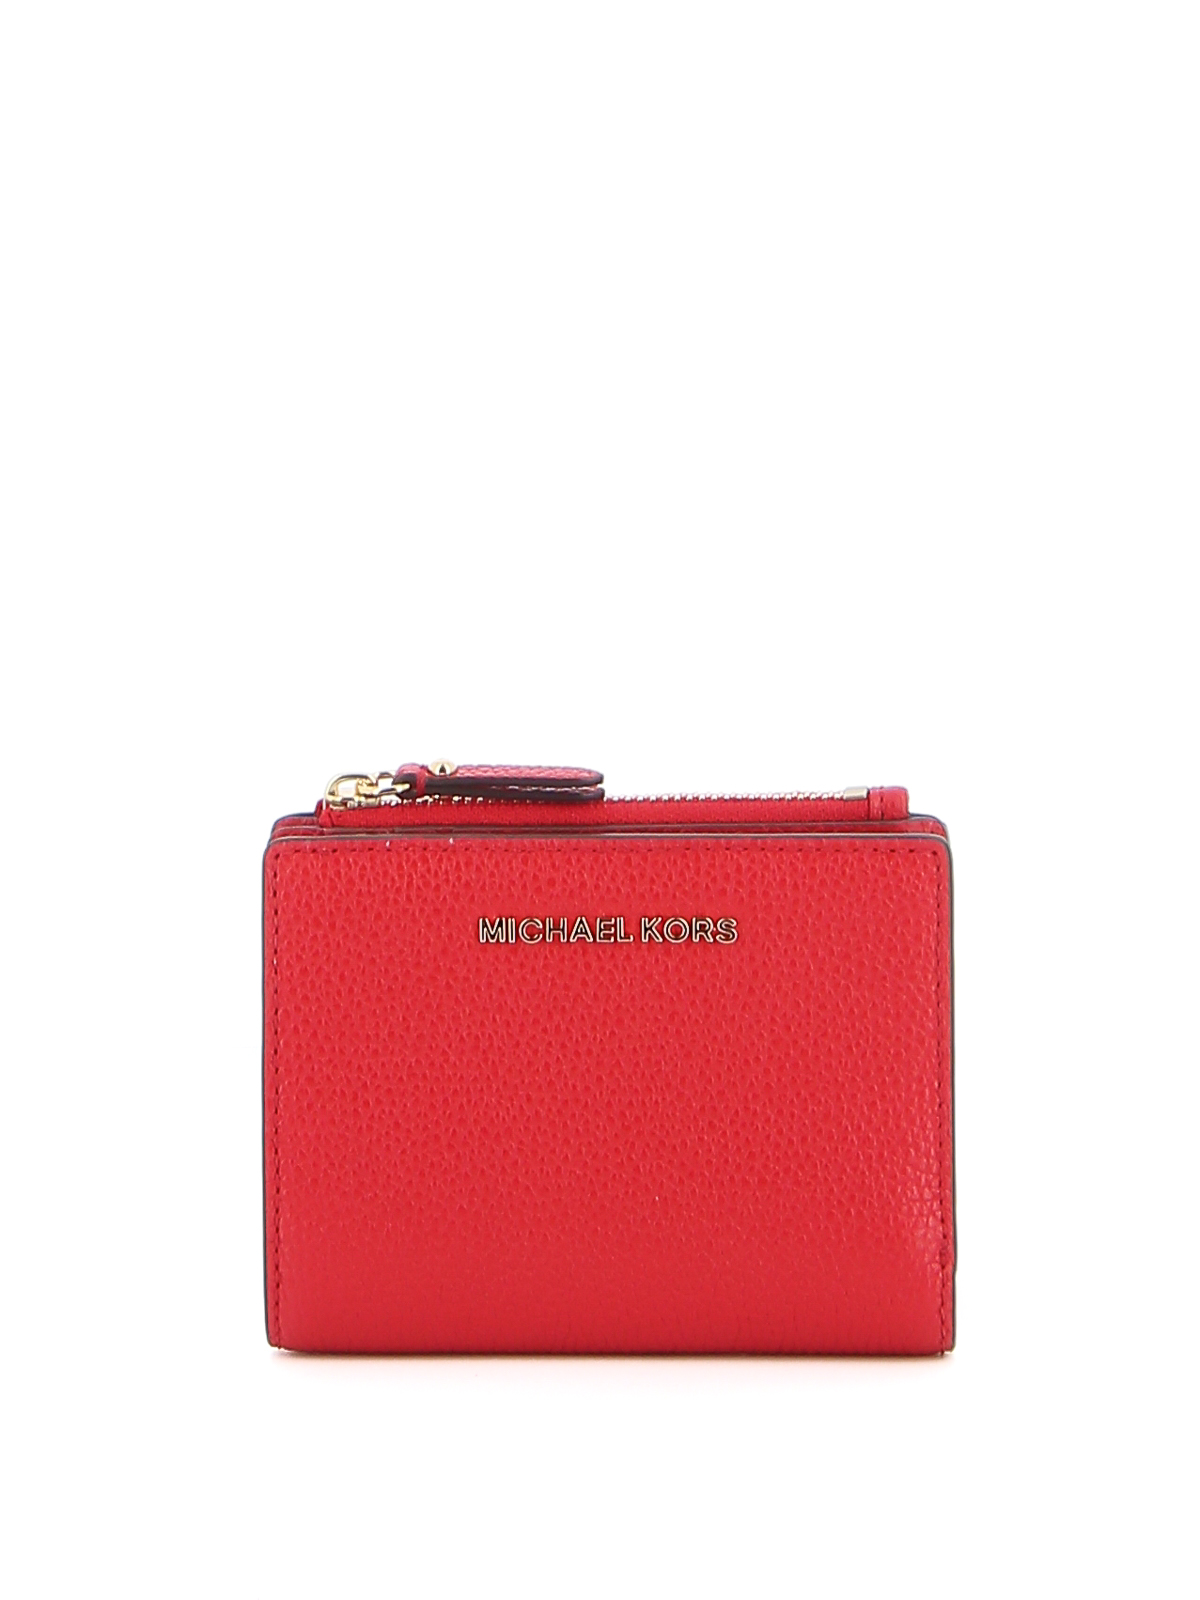 michael kors red leather wallet